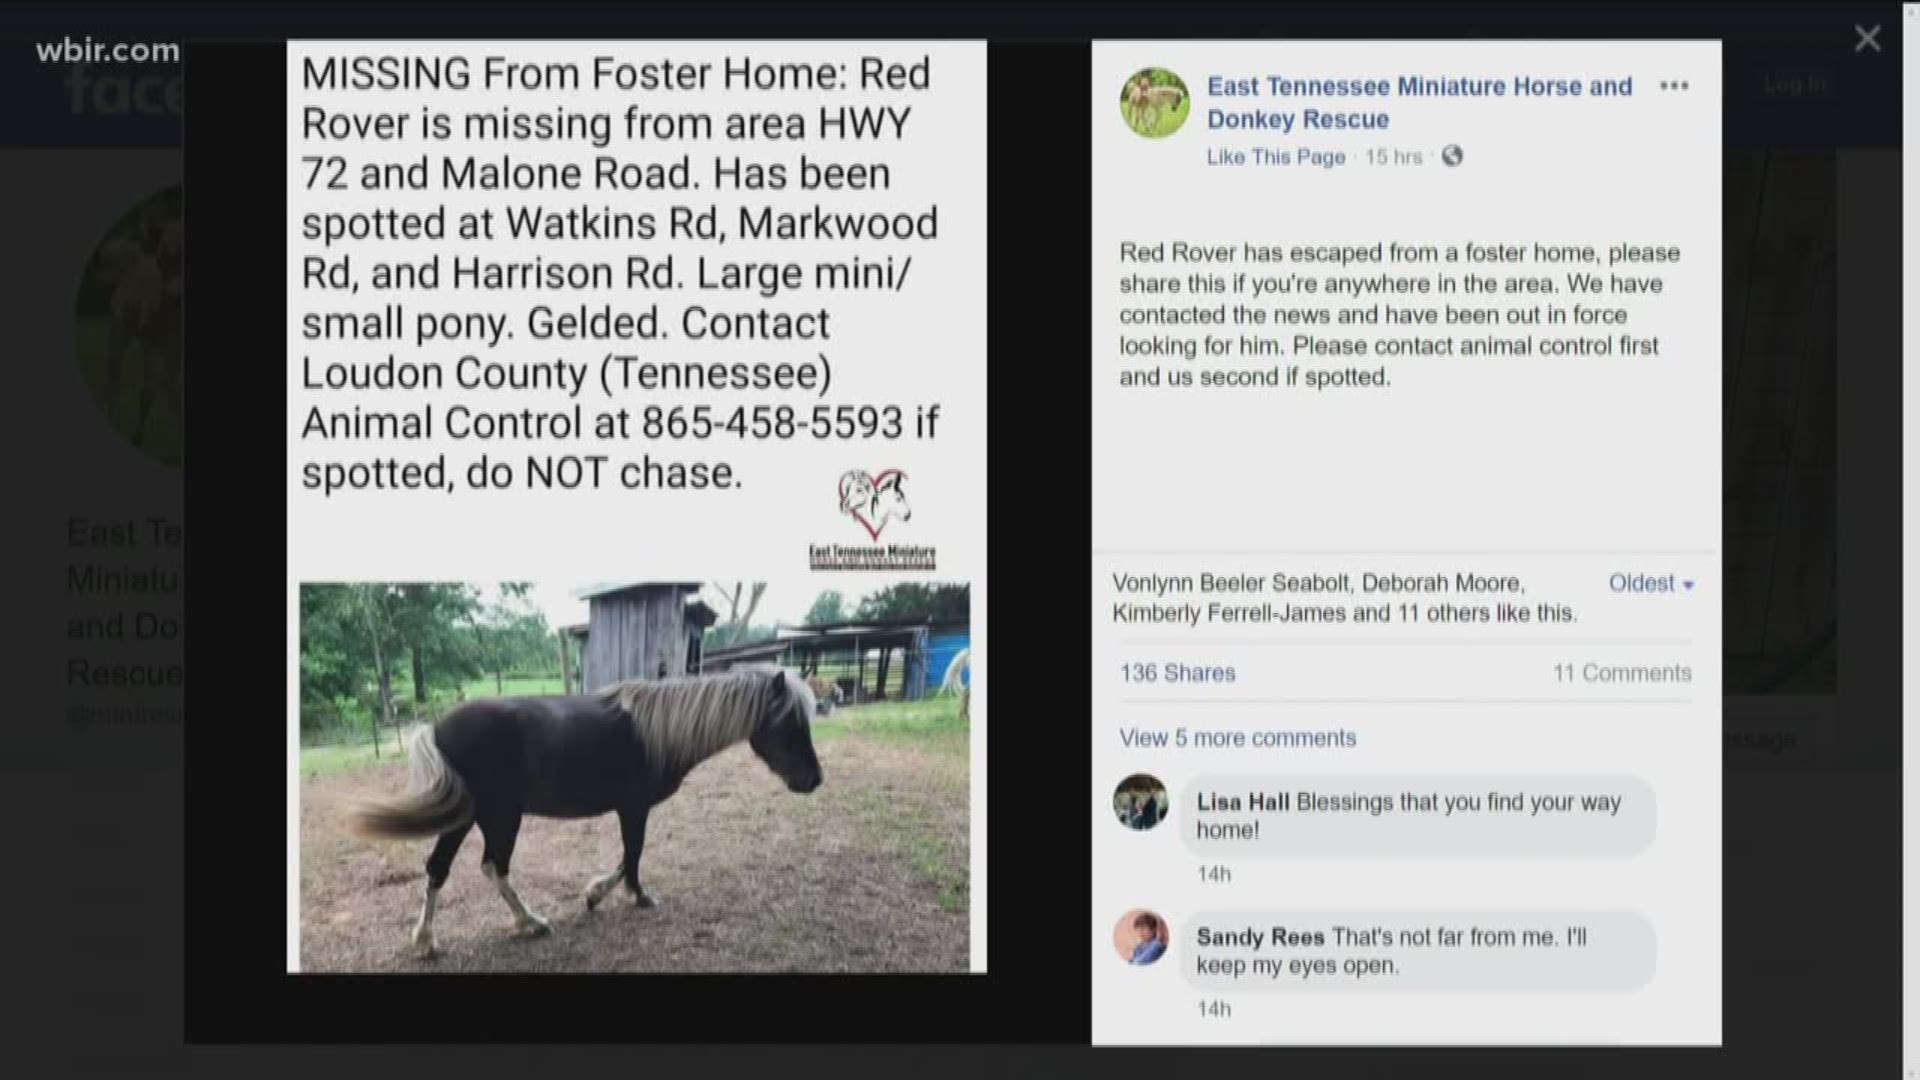 A mini horse is missing from a Loudon County foster home. The East Tennessee Miniature Horse and Donkey Rescue says Red Rover escaped the home over the weekend.